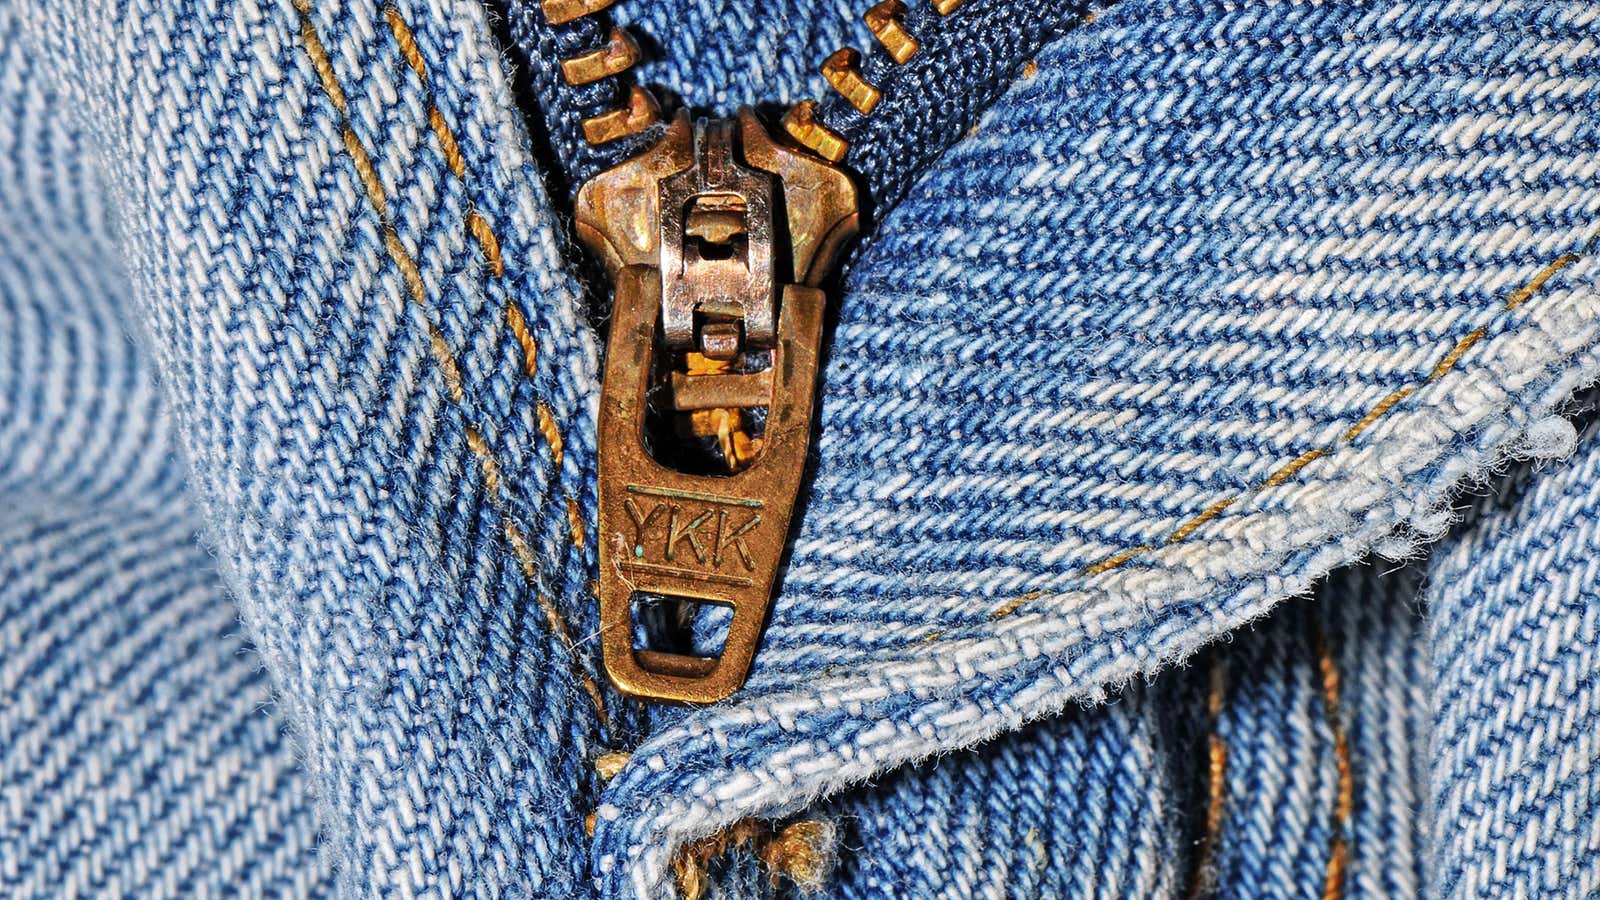 Japanese firm YKK is currently the world’s top zipper manufacturer.